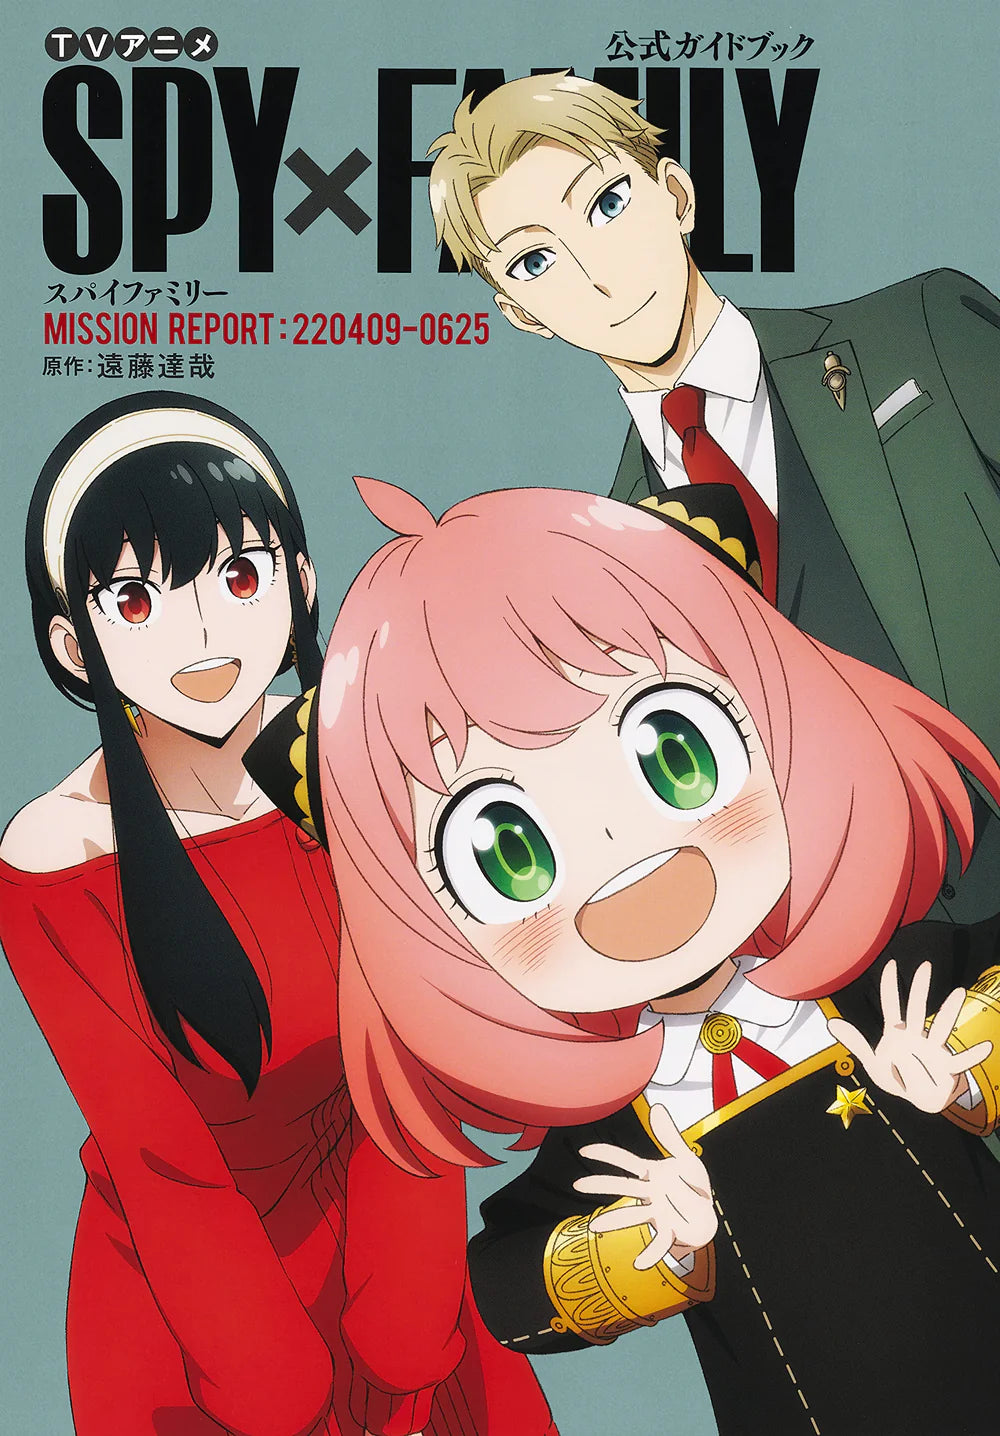 Spy x Family: The Official Anime Guide-Mission Report: 22040 **Pre-Order**